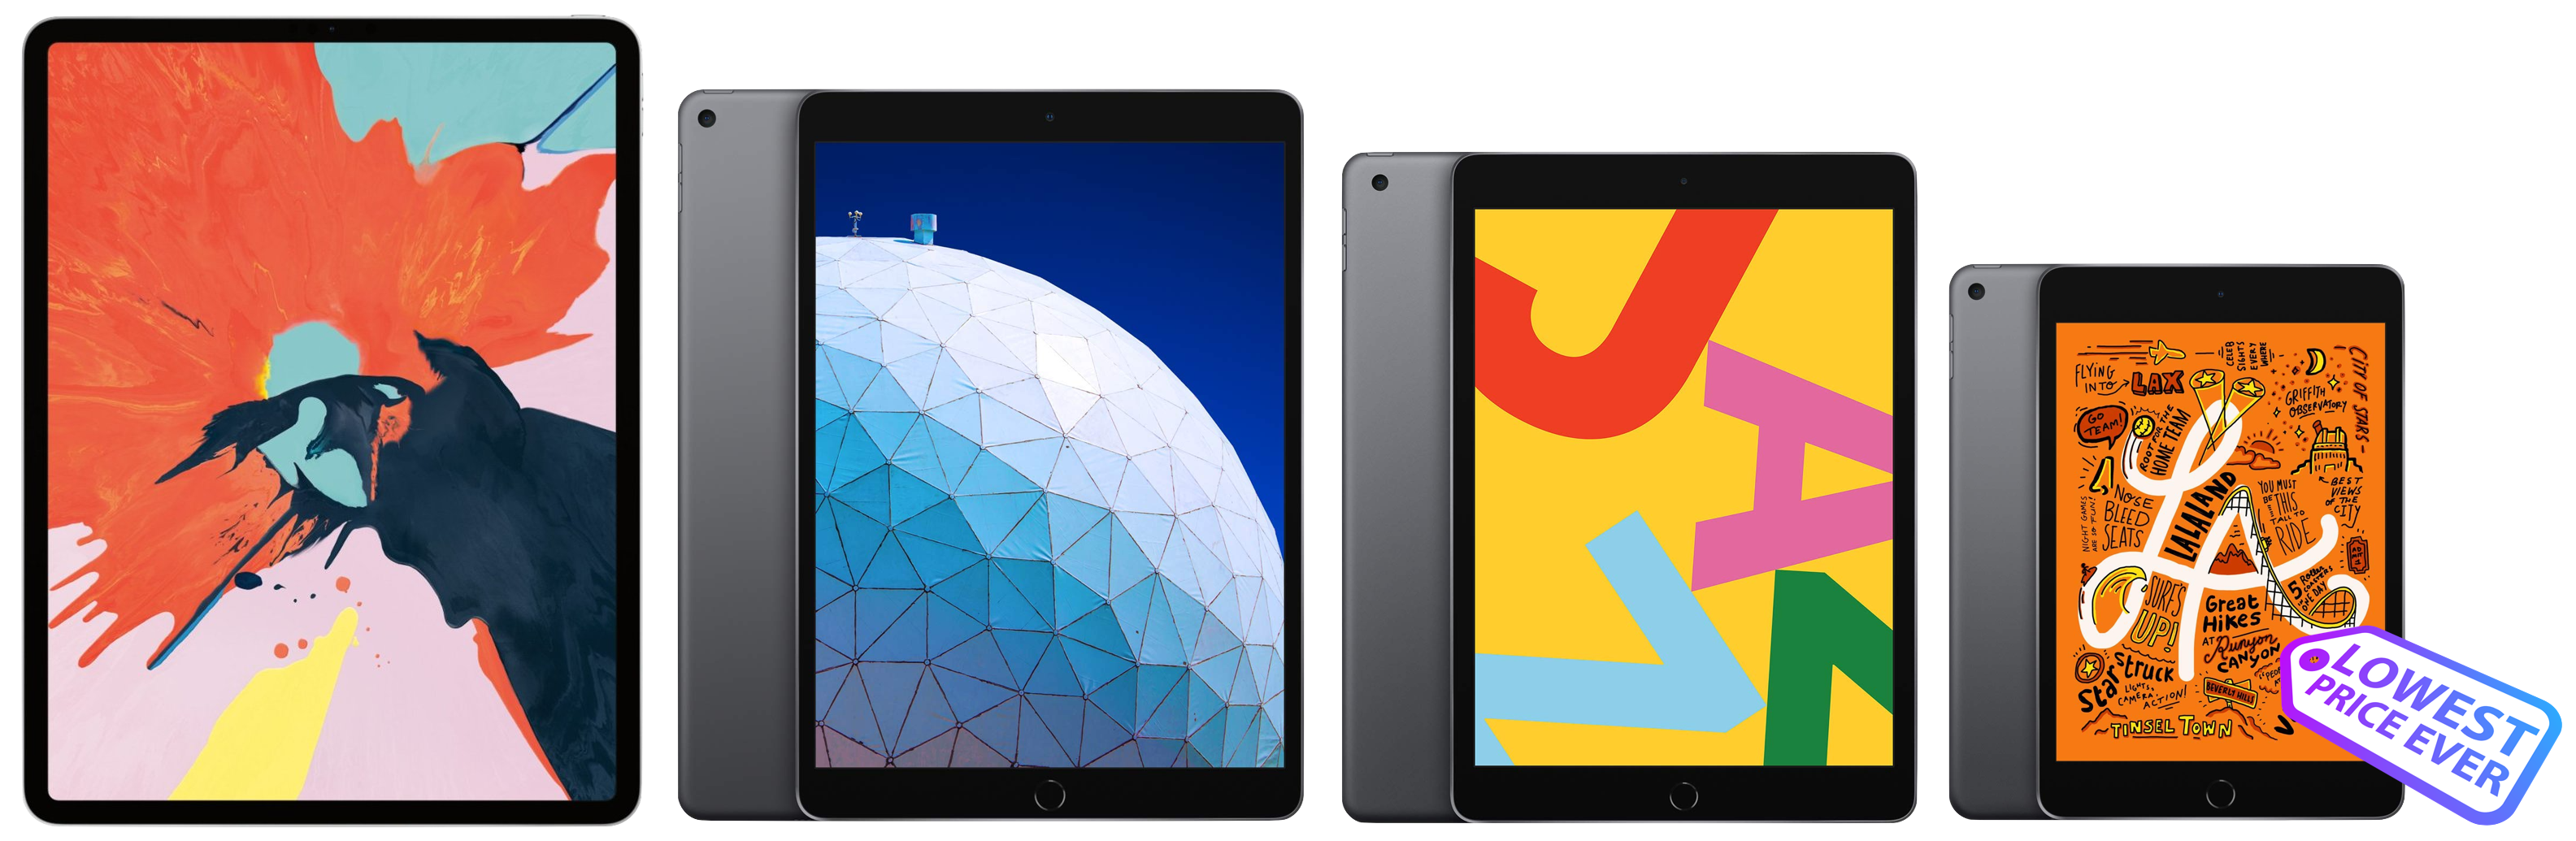 Deals Shop The Best Prices For Apple S Entire Ipad Lineup Up To